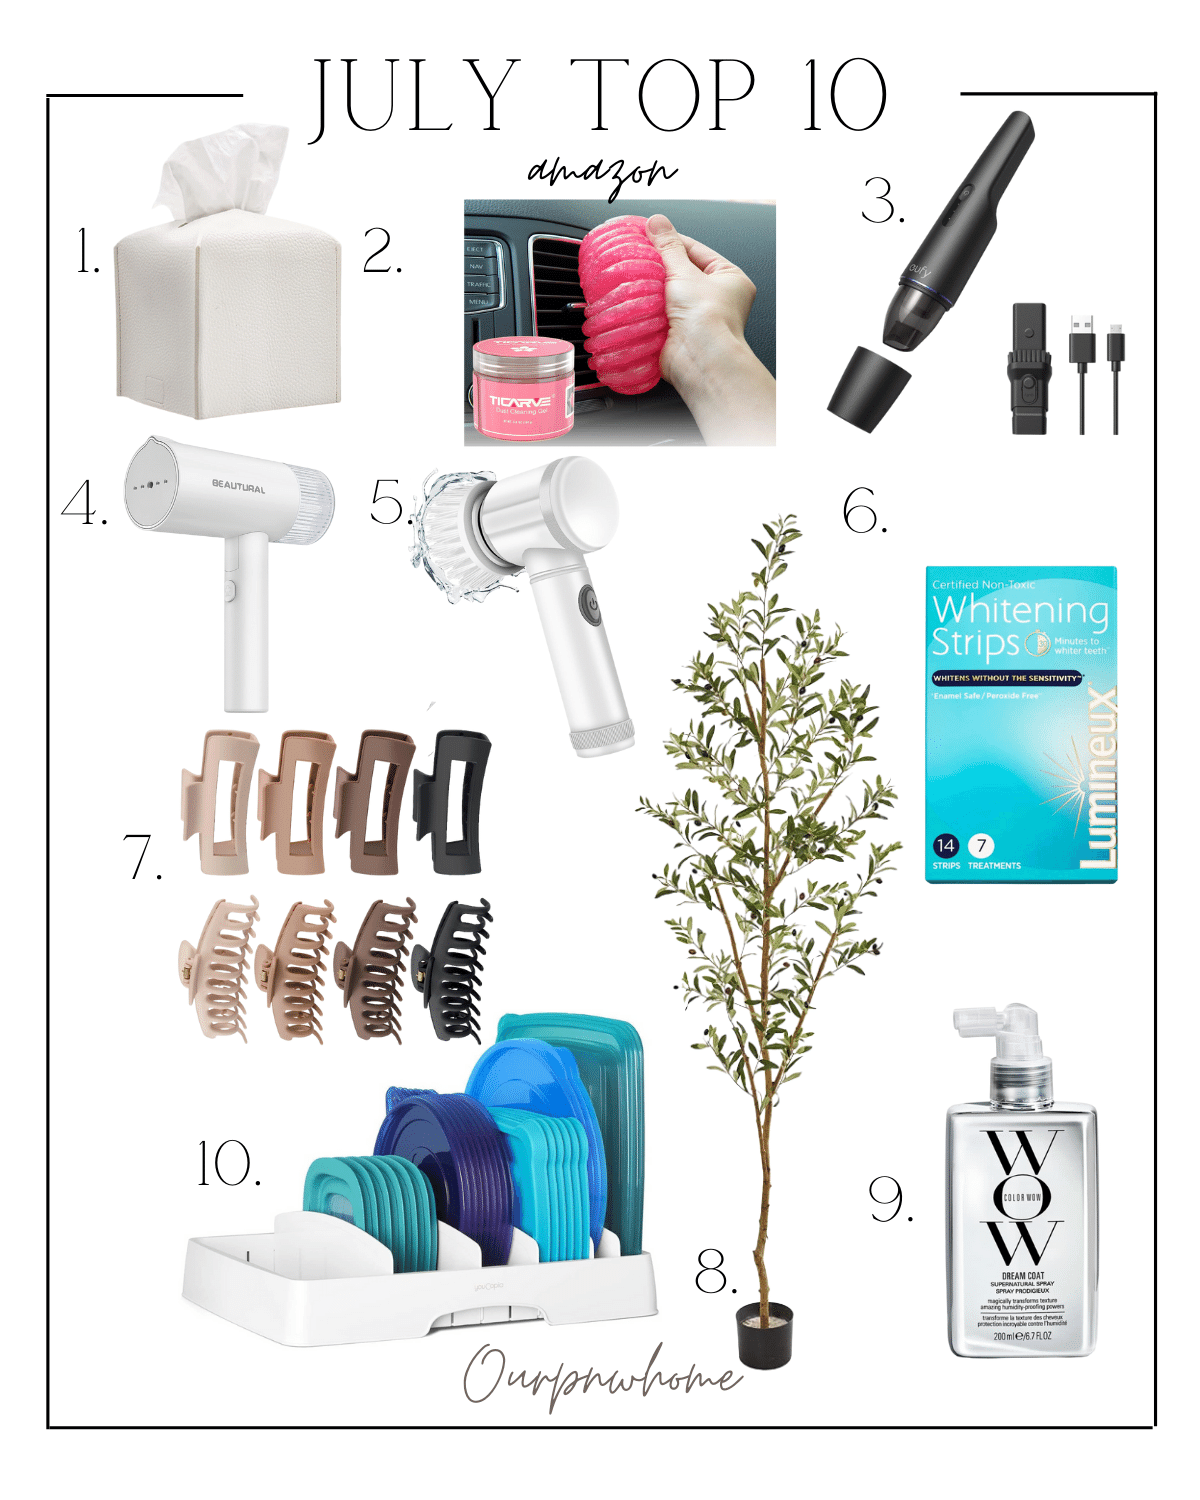 July Top 10 | Amazon Sellers

#amazon #amazonsellers #top10 #topsellers #bestsold #mostsold #luminex #cleaning #cleaningsupplies #tissuebox #homedecor #clawclips #steamer 